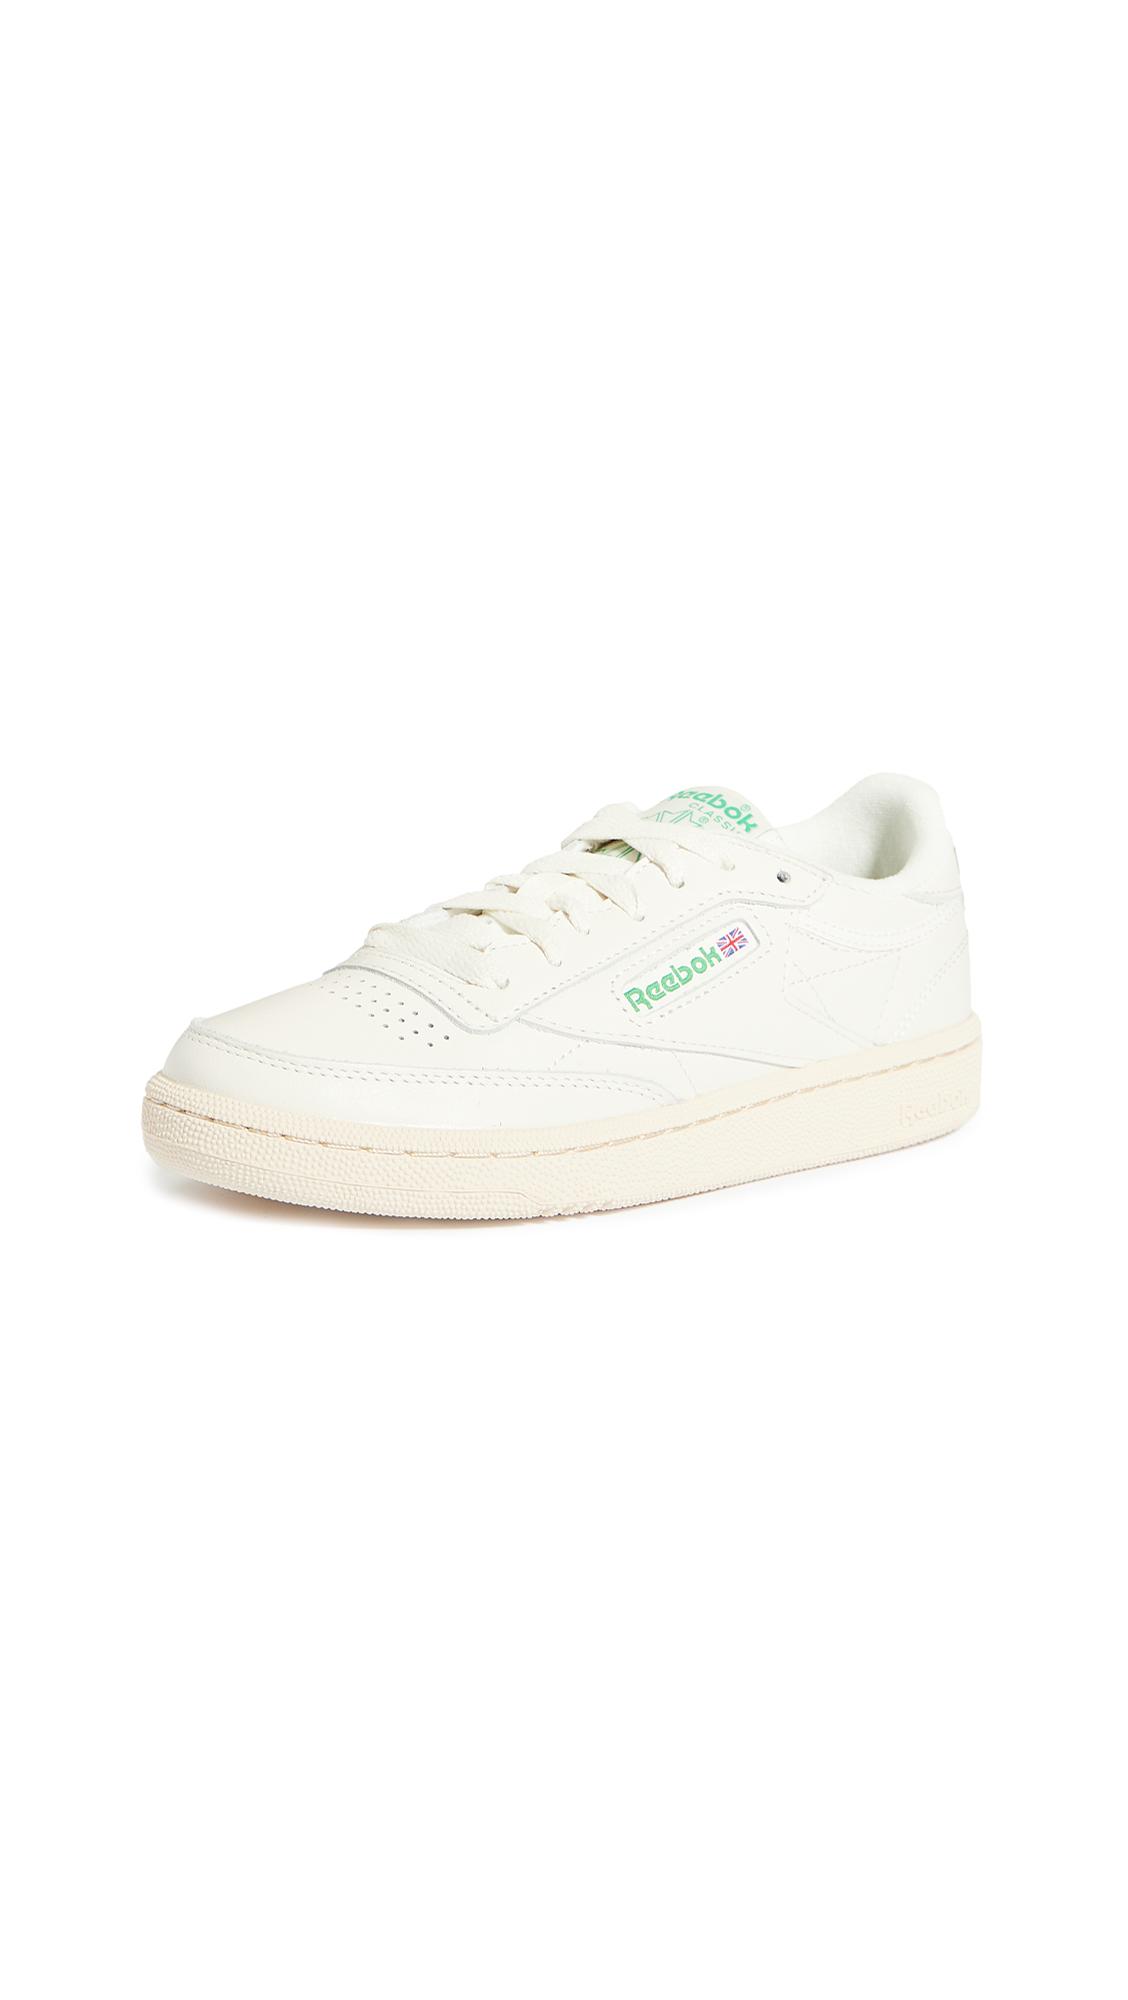 Reebok Leather Club C 85 Classic Lace Up Sneakers in White - Lyst